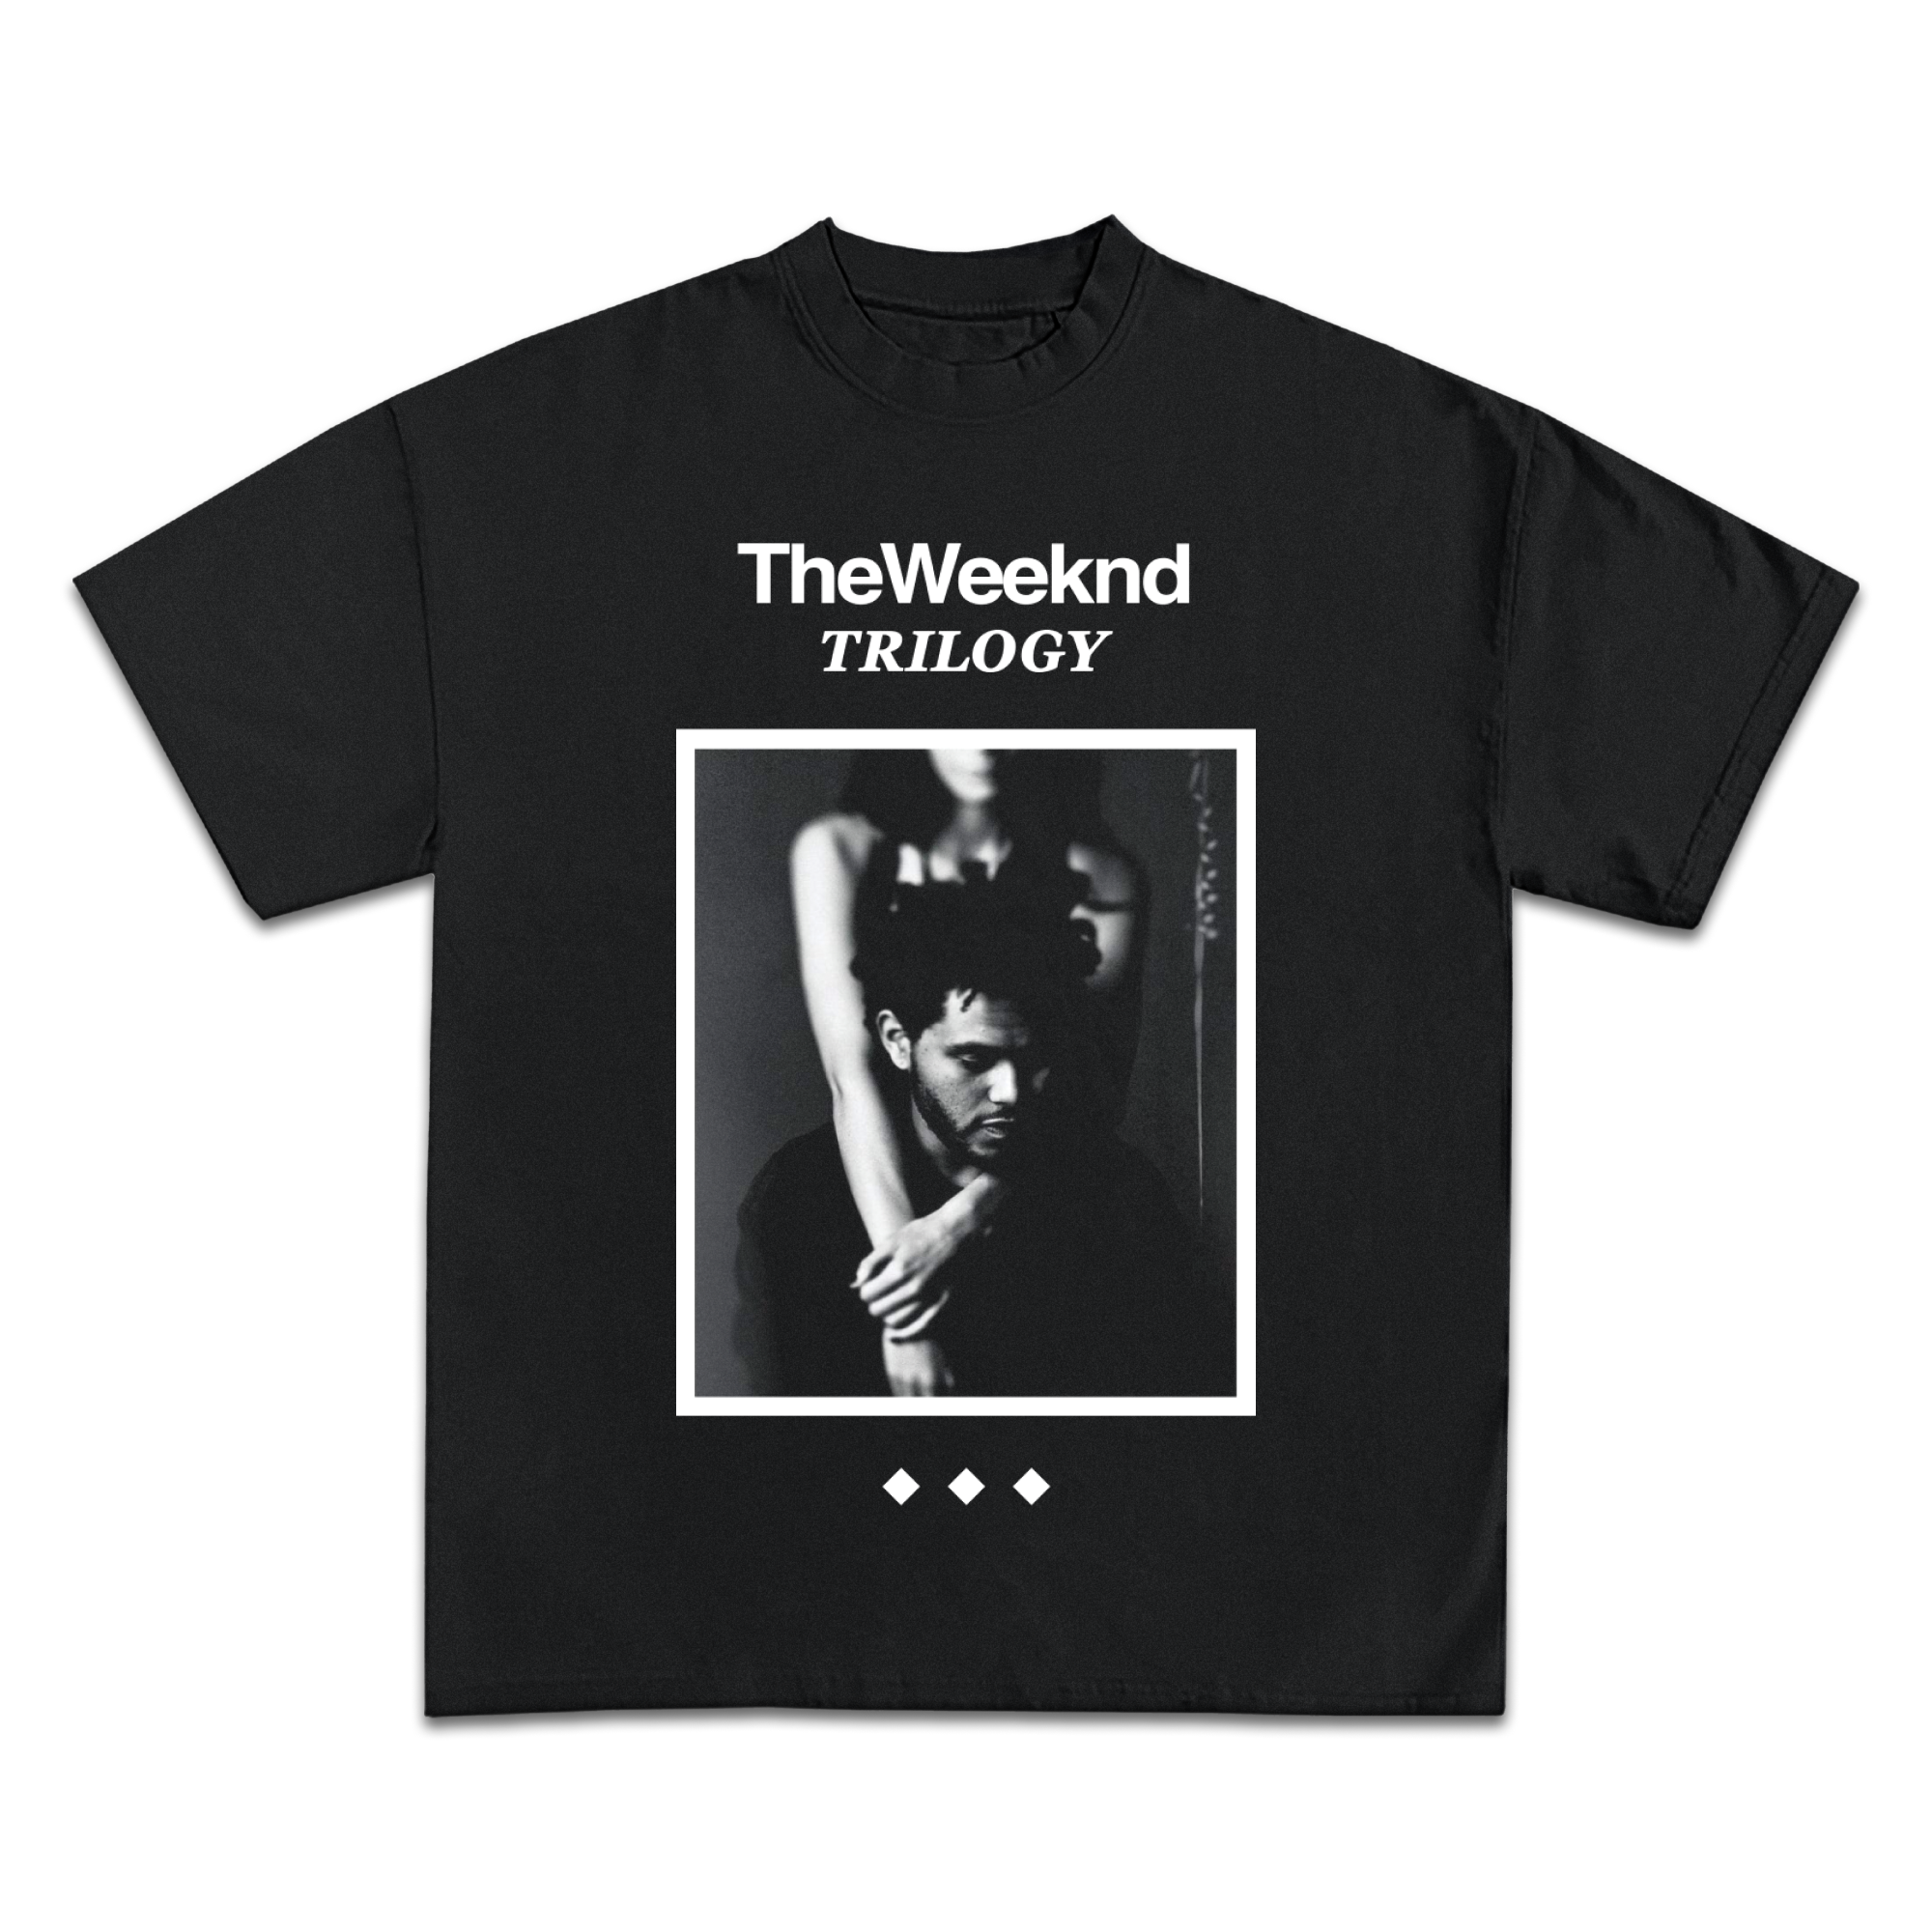 The Weeknd Trilogy Graphic T-Shirt